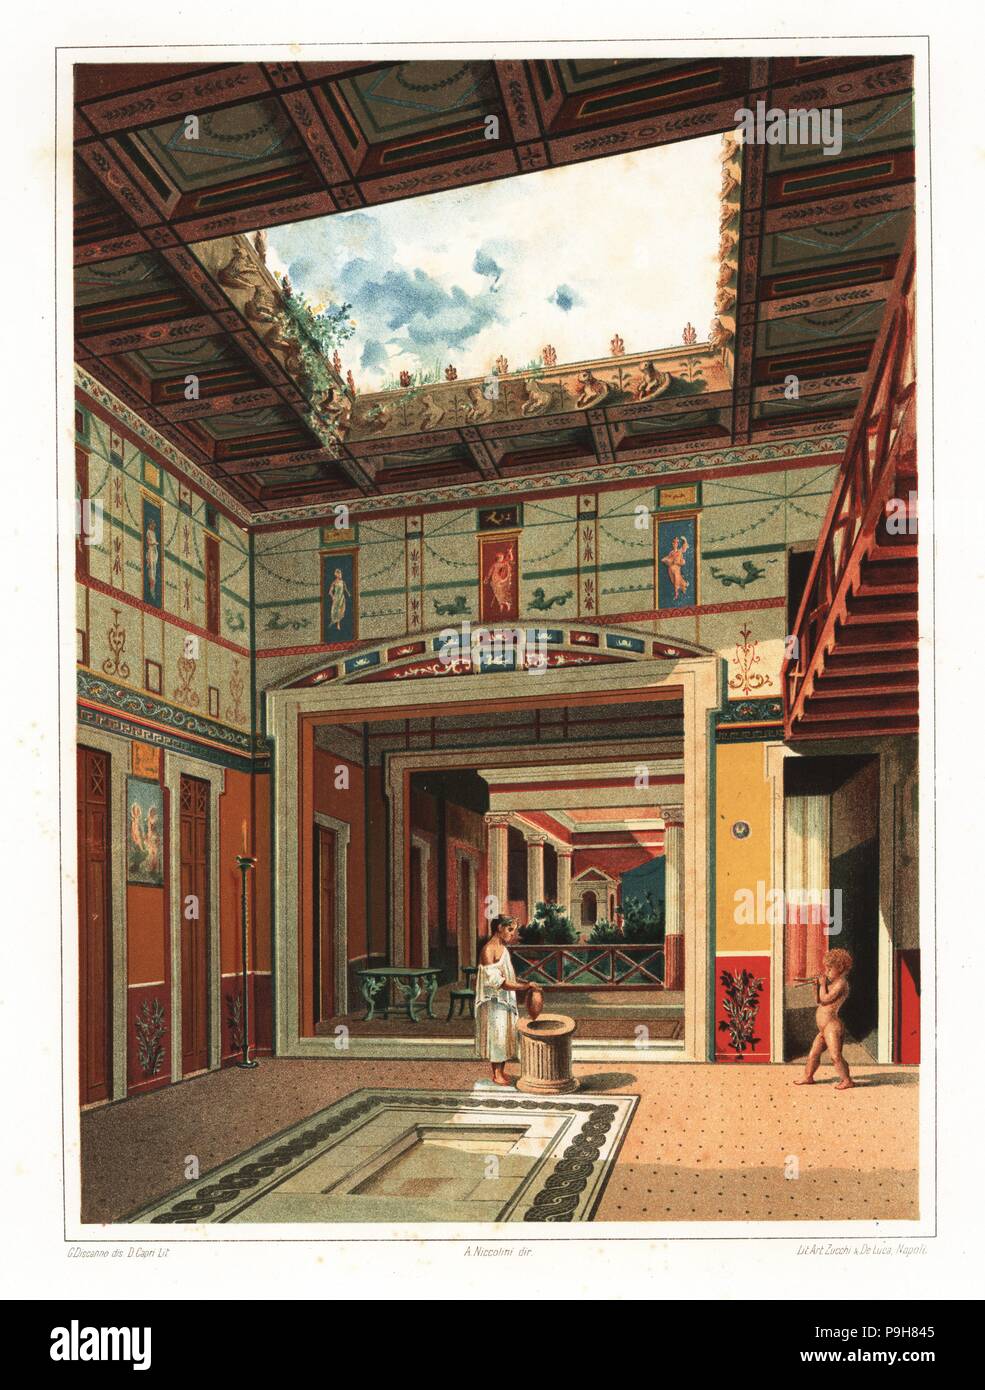 House of the Tragic Poet, Pompeii VI.8.5. Slave boy filling an amphora at the well near the impluvium pool in the tablinum. In the background, the peristyle garden courtyard and aedicula lararium shrine. Chromolithograph by D. Capri after an illustration by G. Discanno from Antonio Niccolini’s Pompeii: Views and Restorations (Pompeii: Essaies et Restaurations), published by Zucchi & De Luca, Naples, 1898. Antonio was grandson of the architect Antonio Niccolini Sr. Stock Photo